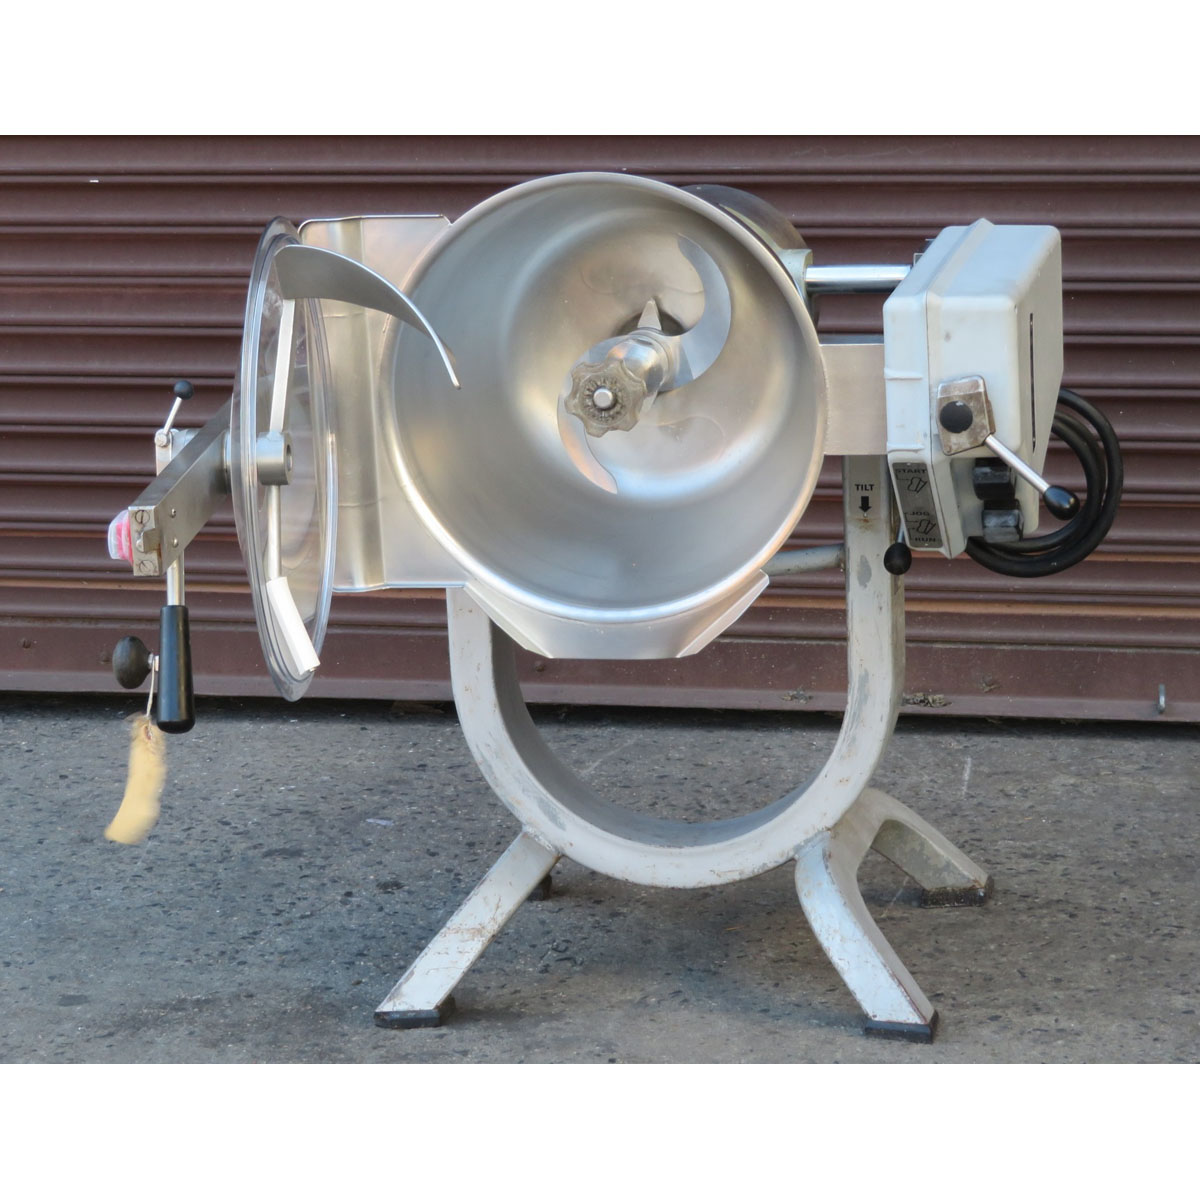 Hobart HCM-300 Vertical Cutter Mixer, Used Excellent Condition image 1